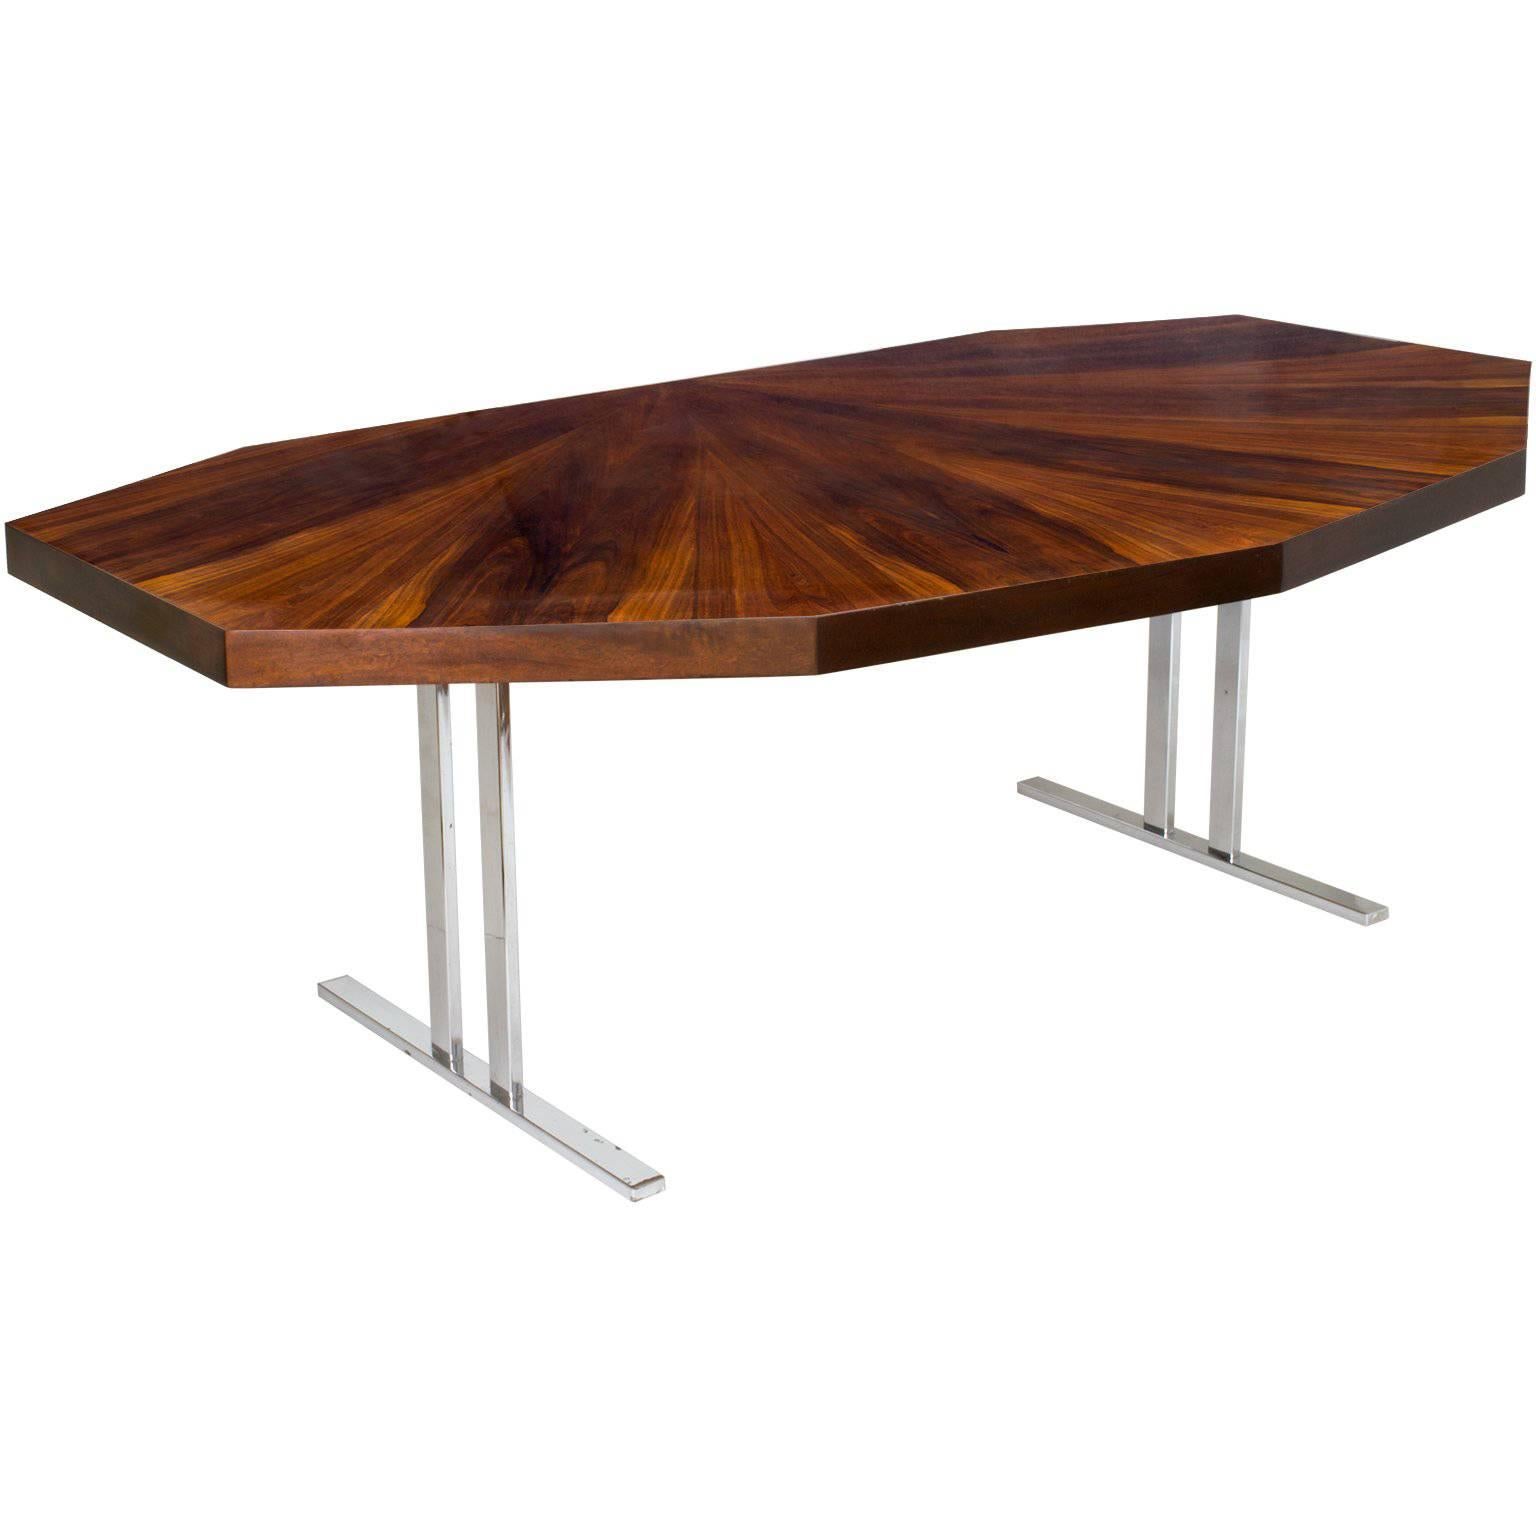 Scandinavian Modern Rosewood Dining Table with Nine Angled Sides on Chrome Legs 